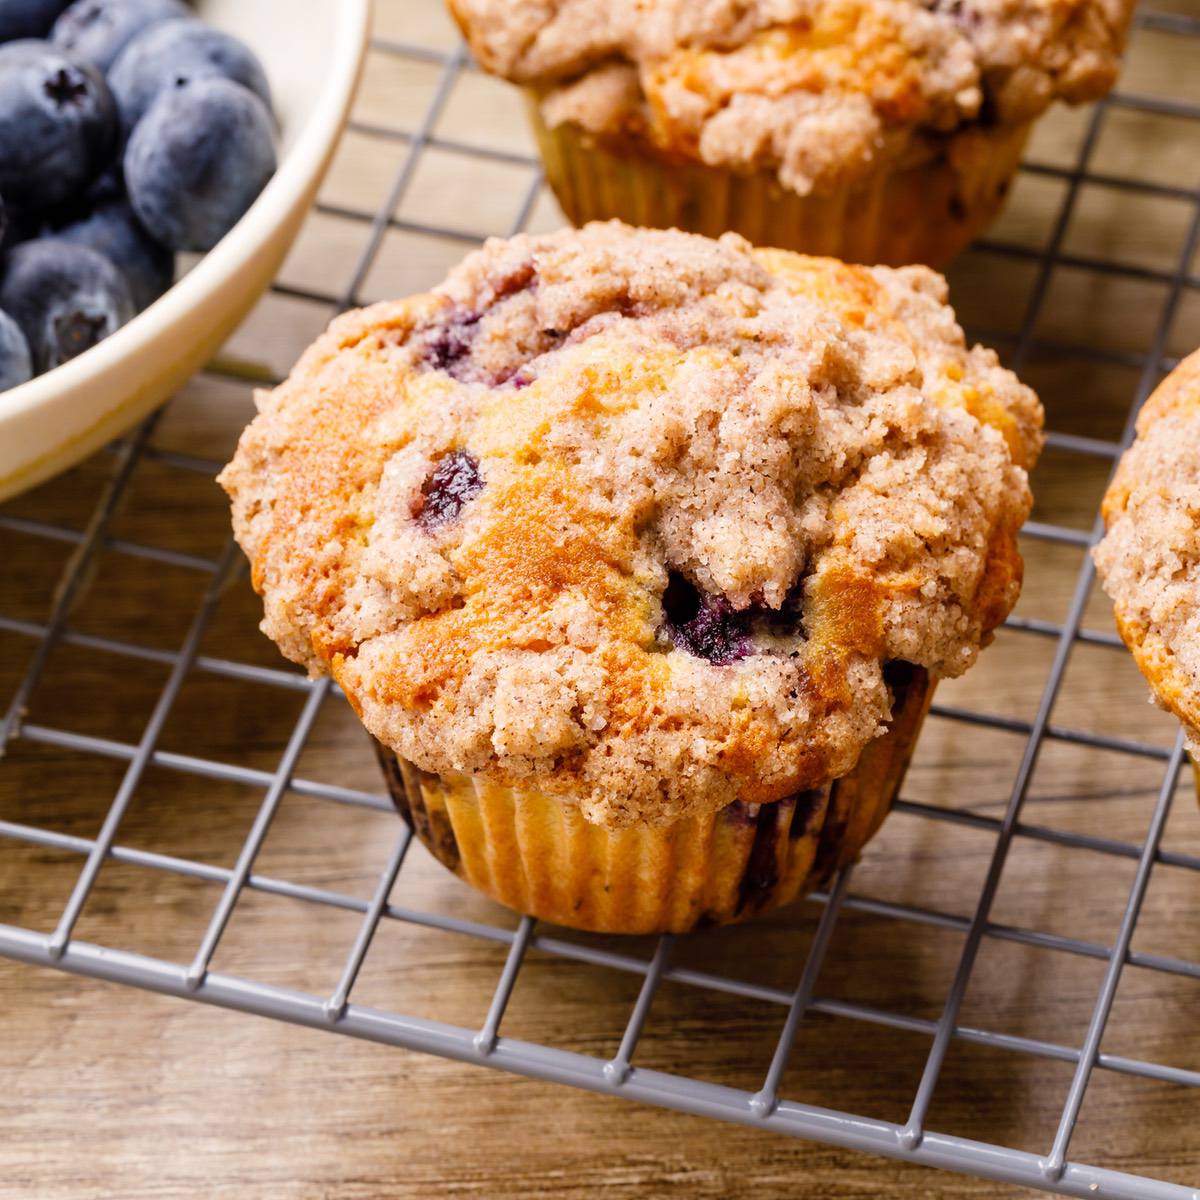 crumble top blueberry muffins